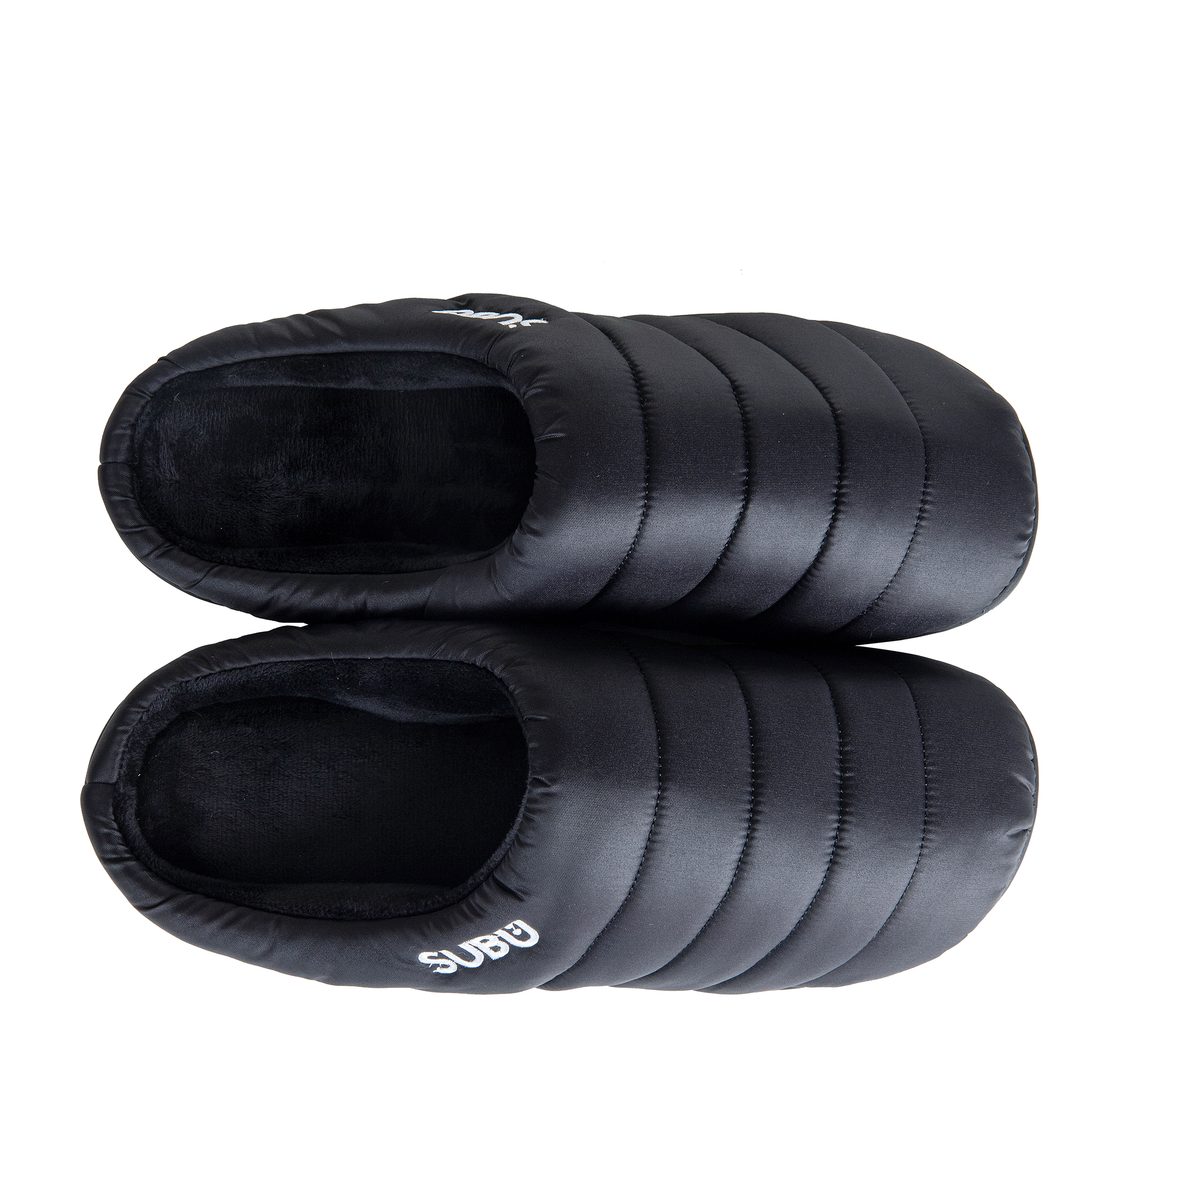 SUBU, Fall & Winter Slippers Black, Size, 0, Slippers,